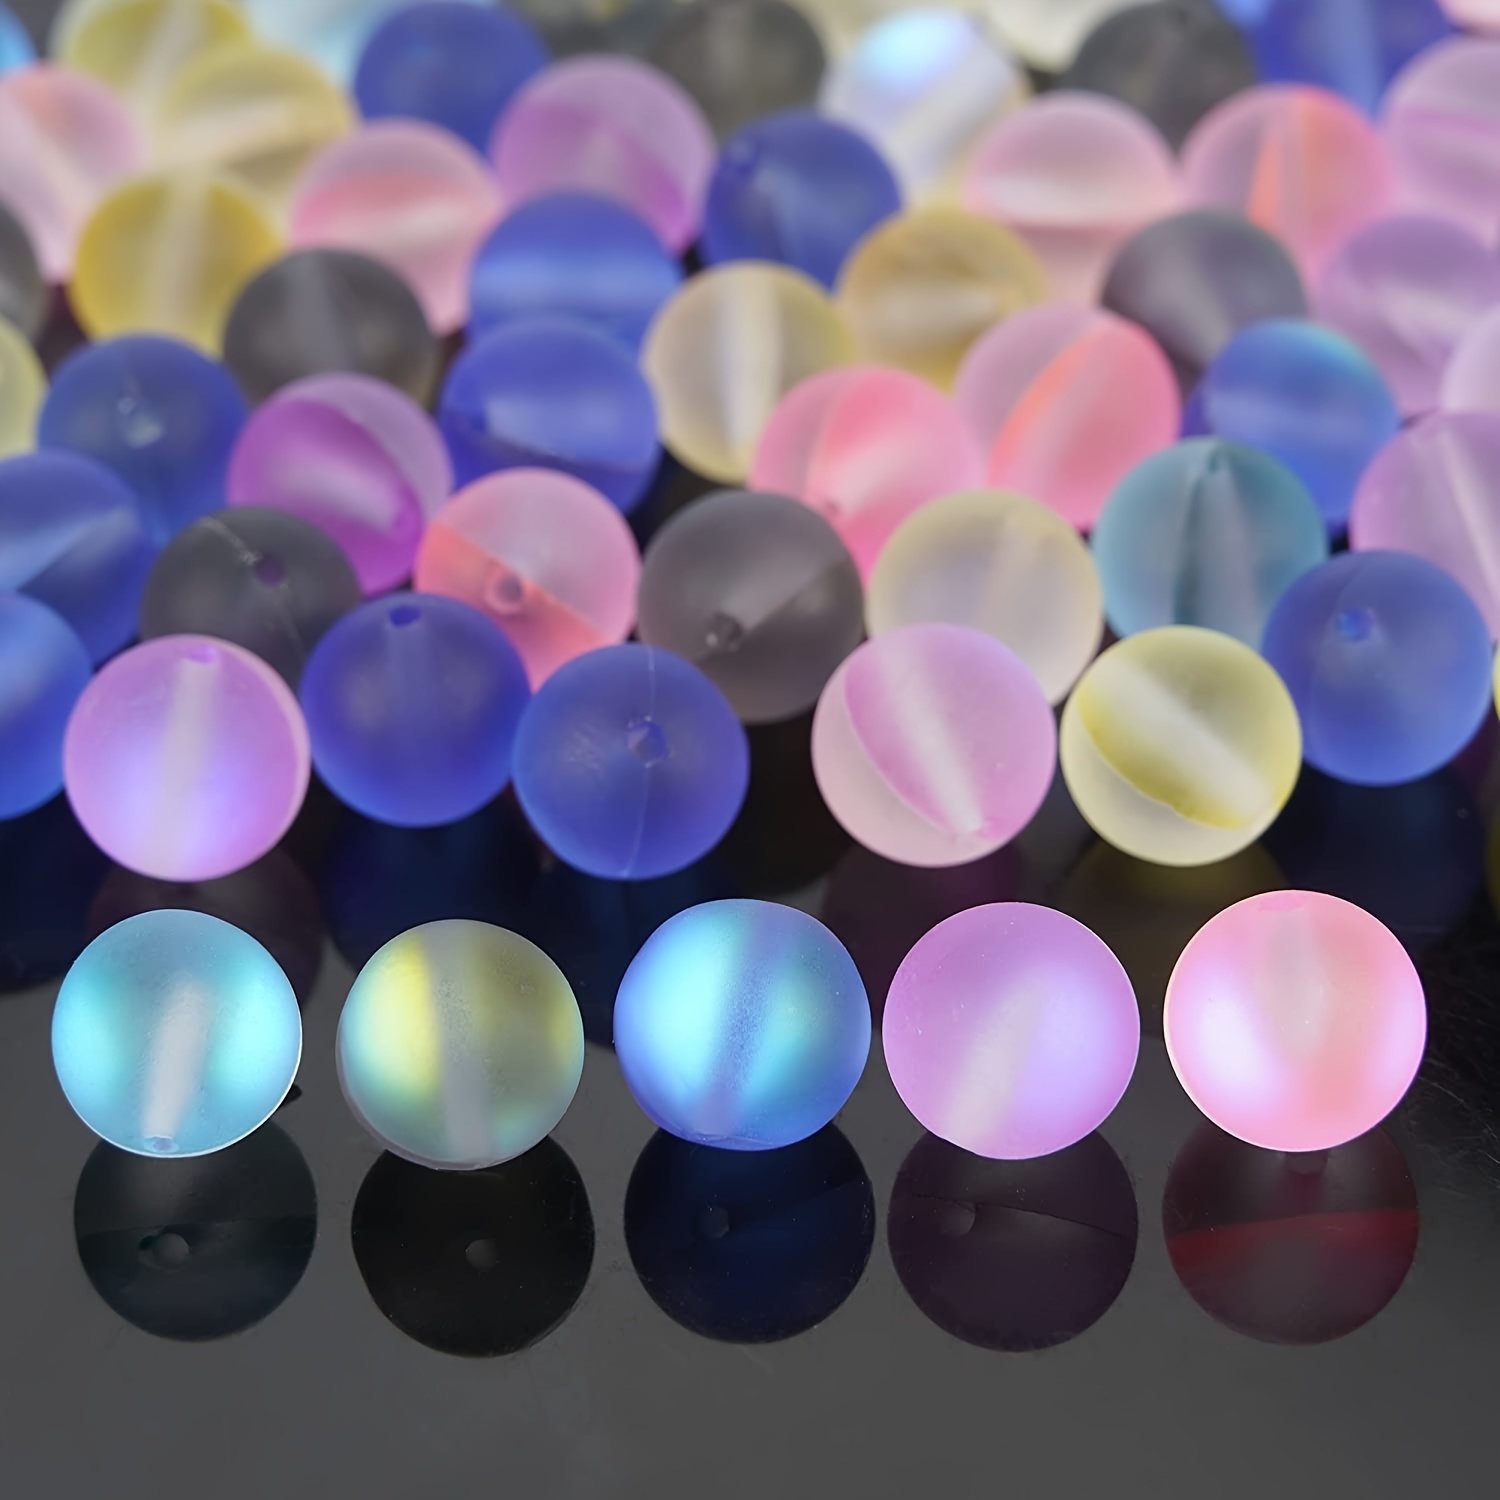  Matte Aurora Crystal Glass Beads 100Pcs 8mm Frosted Mystic Aura  Mermaid Glass Beads Mermaid Shimmer Flash Round Moonstones for Bracelet  Necklace Jewelry Making DIY Craft(Green)